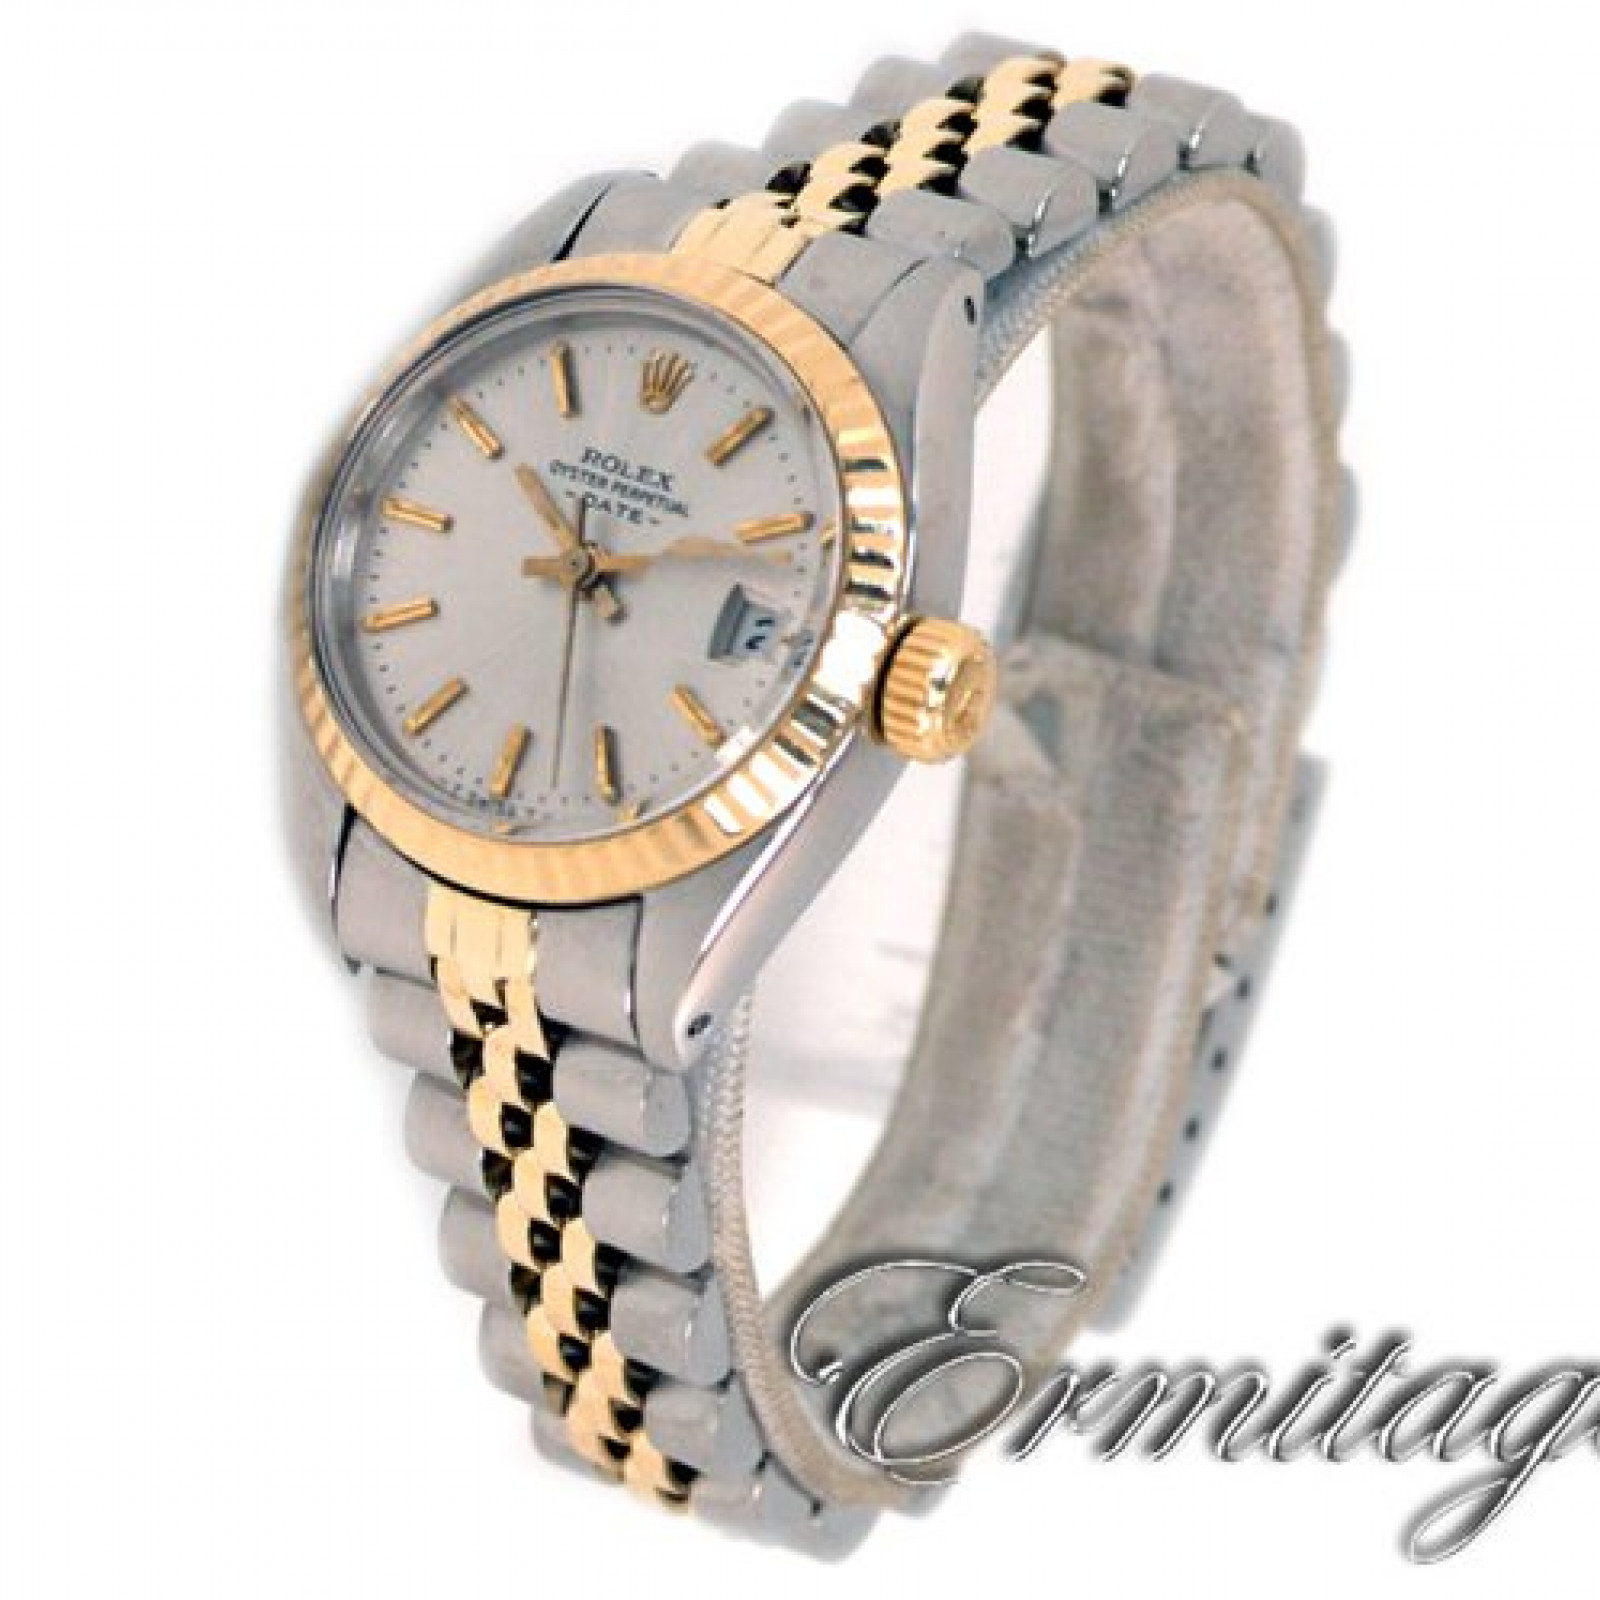 Vintage Rolex Oyster Perpetual Date 6916 Gold & Steel